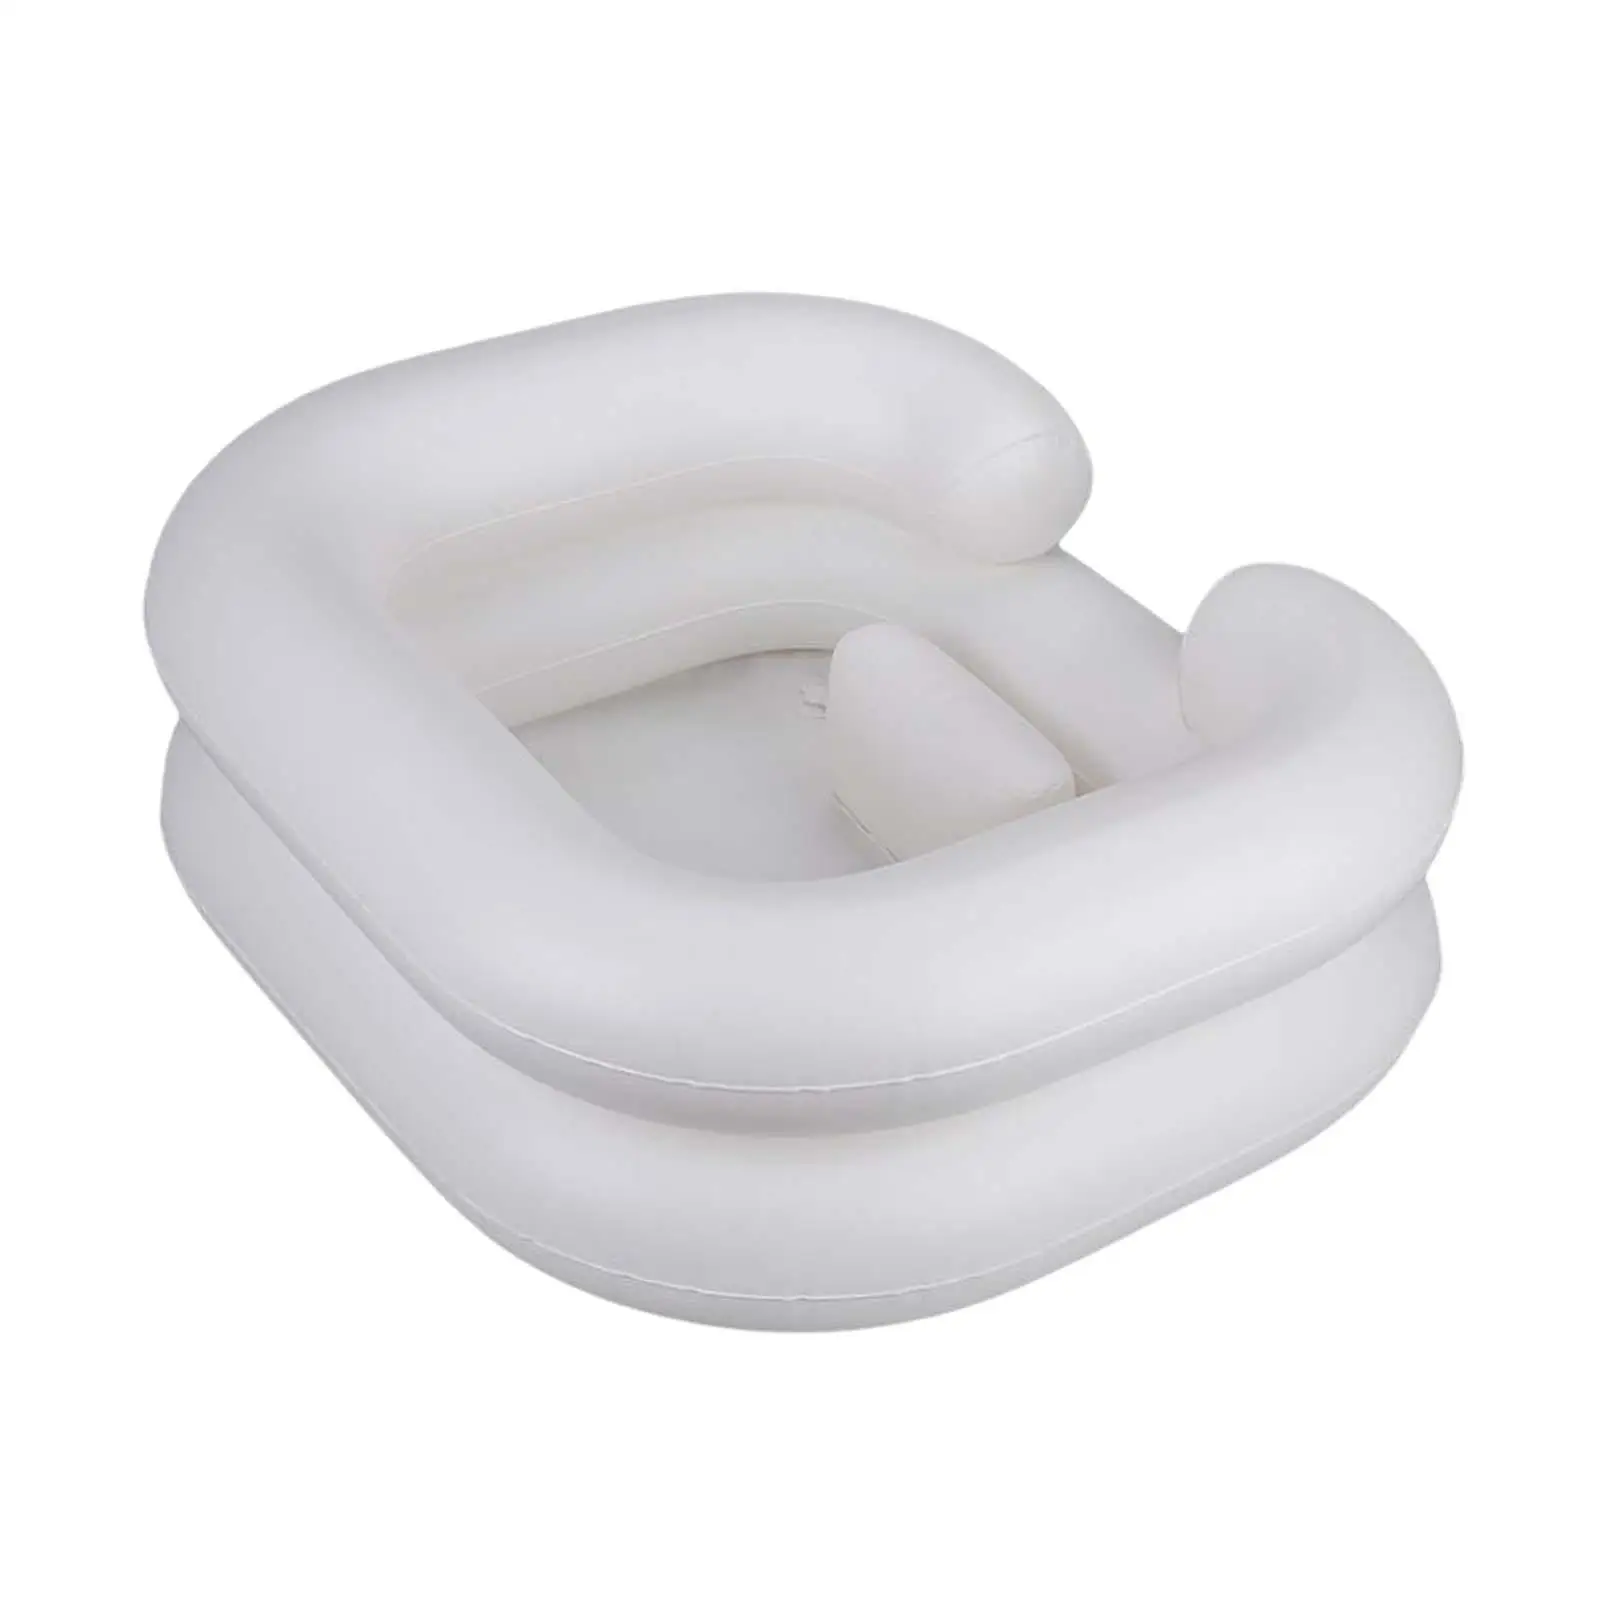 Inflatable Shampoo Basin Wash Hair in Bed Neck Support Hair Washing Tray Hair Wash Tub Inflatable Sink Hair Cuts Hair Coloring